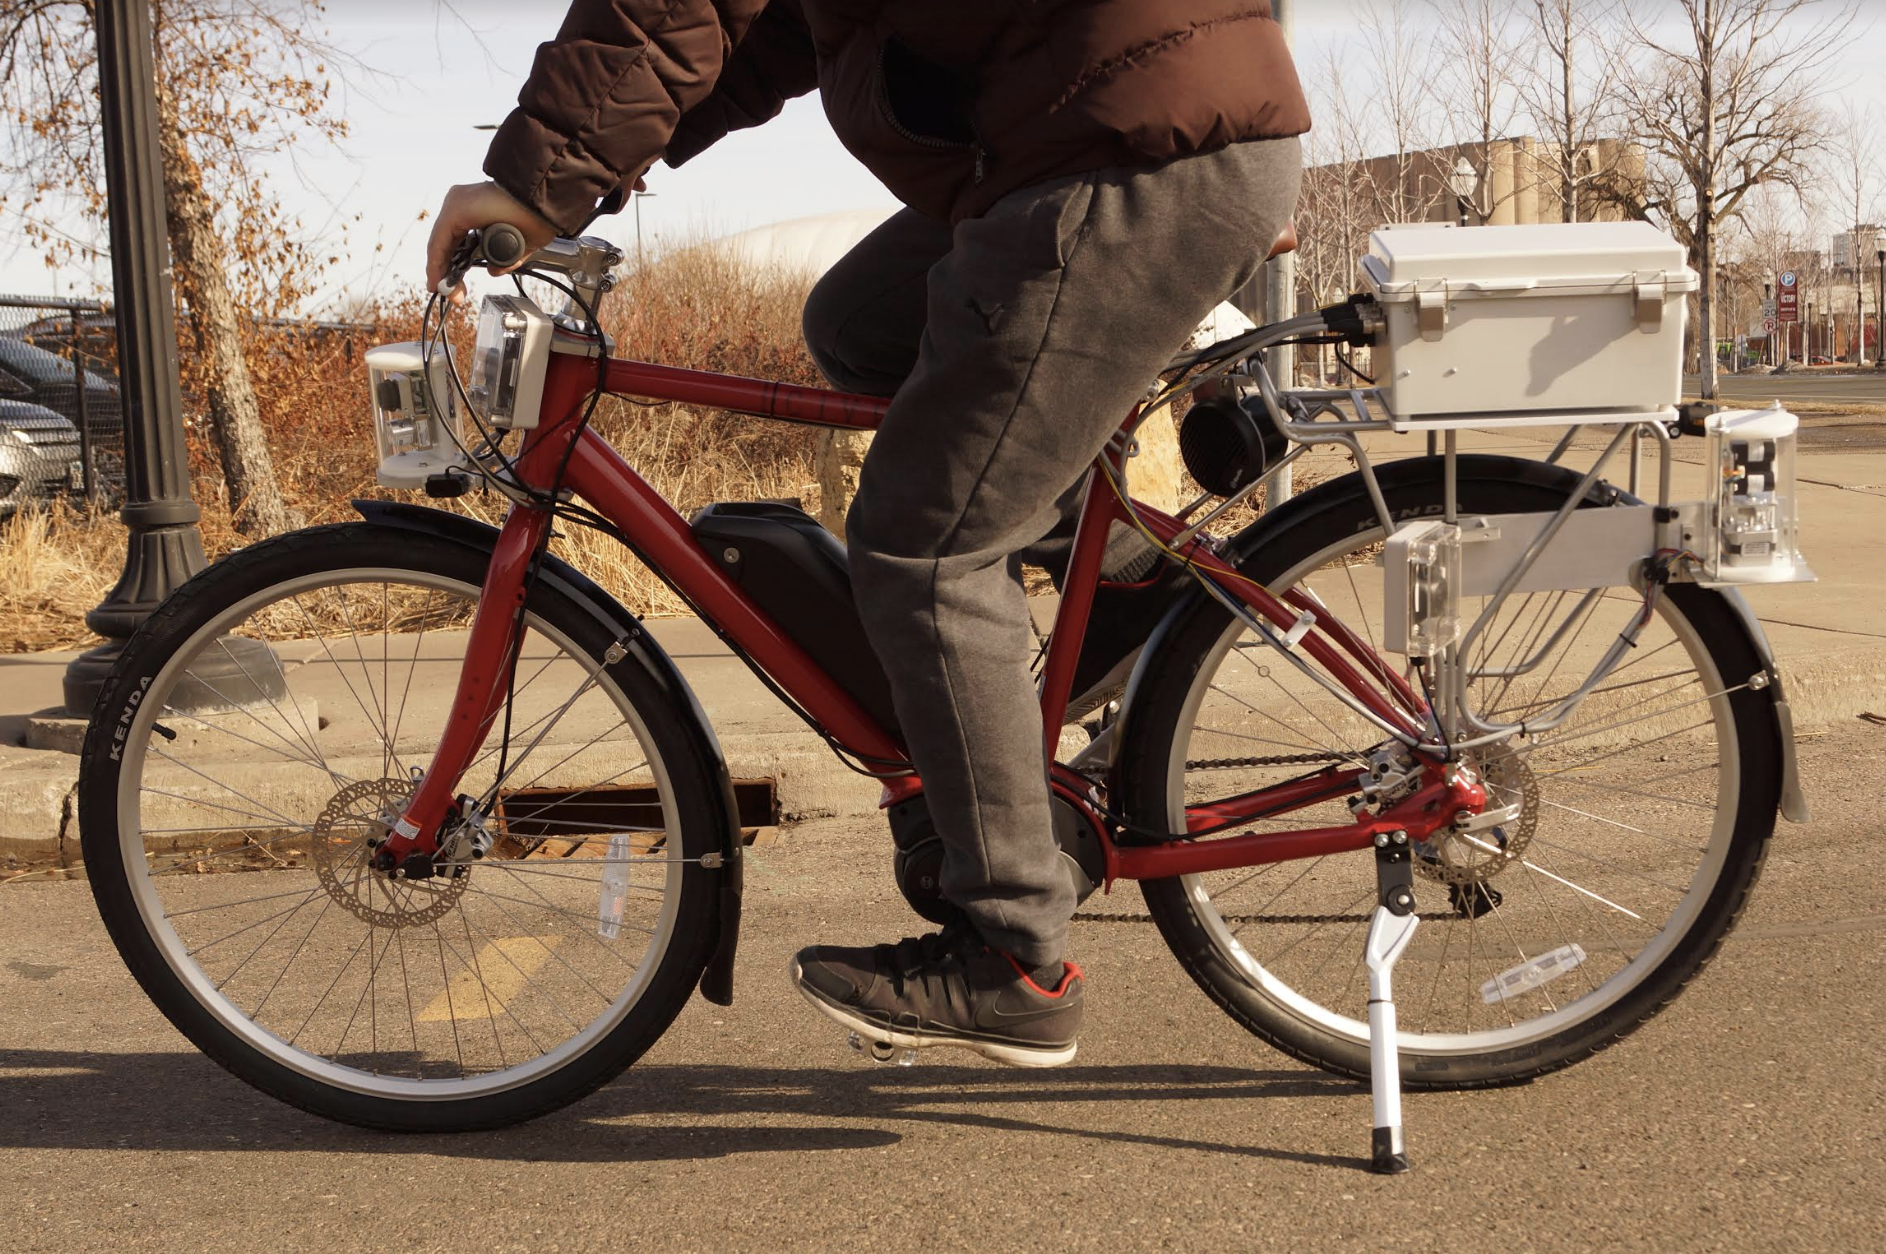 Sensors on a bicycle to detect nearby vehicles